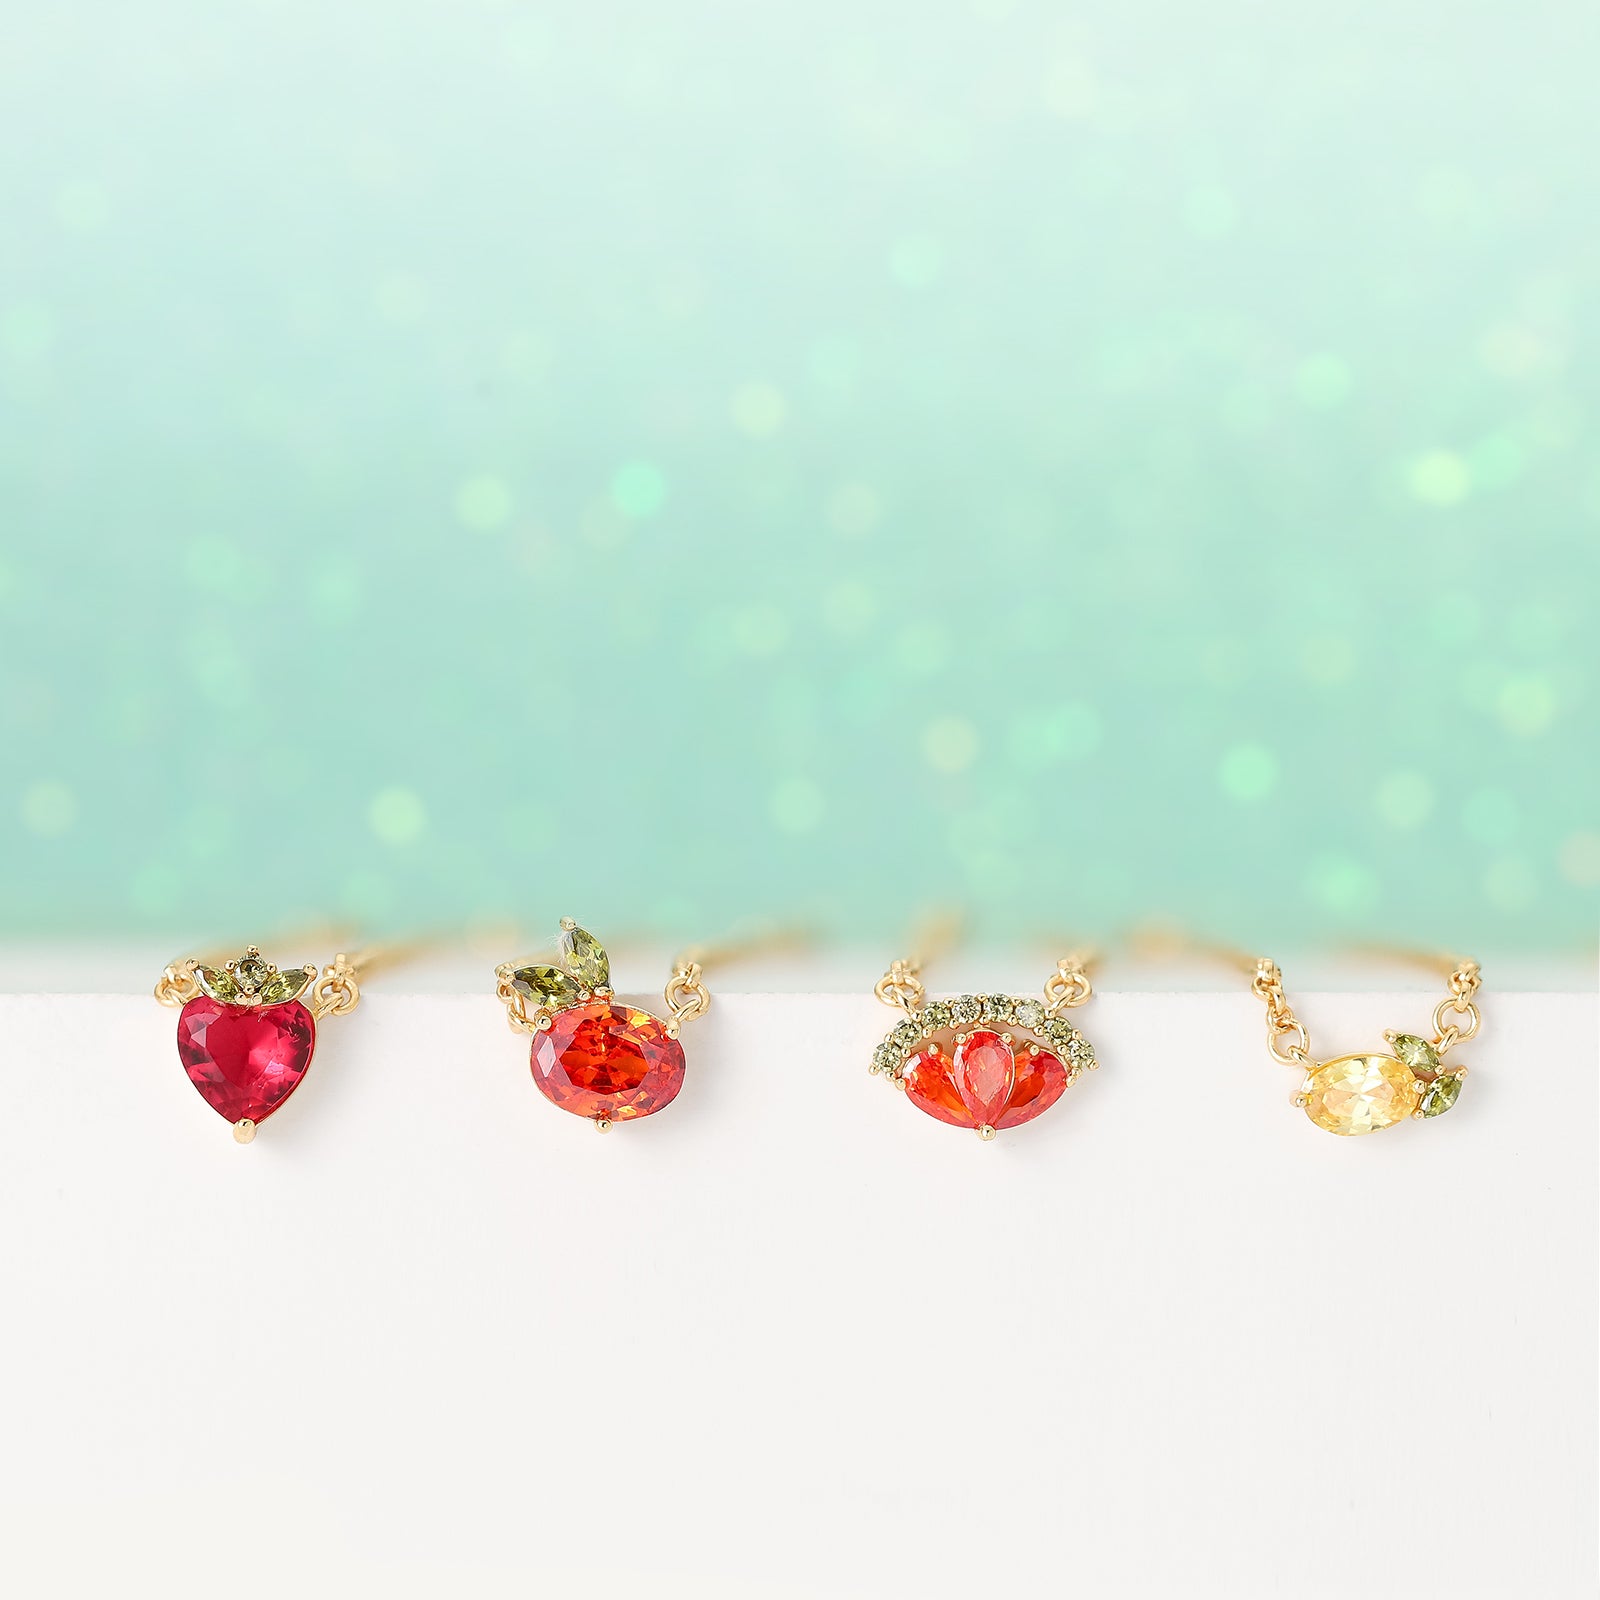 Fruit Party Pineapple Necklace Set